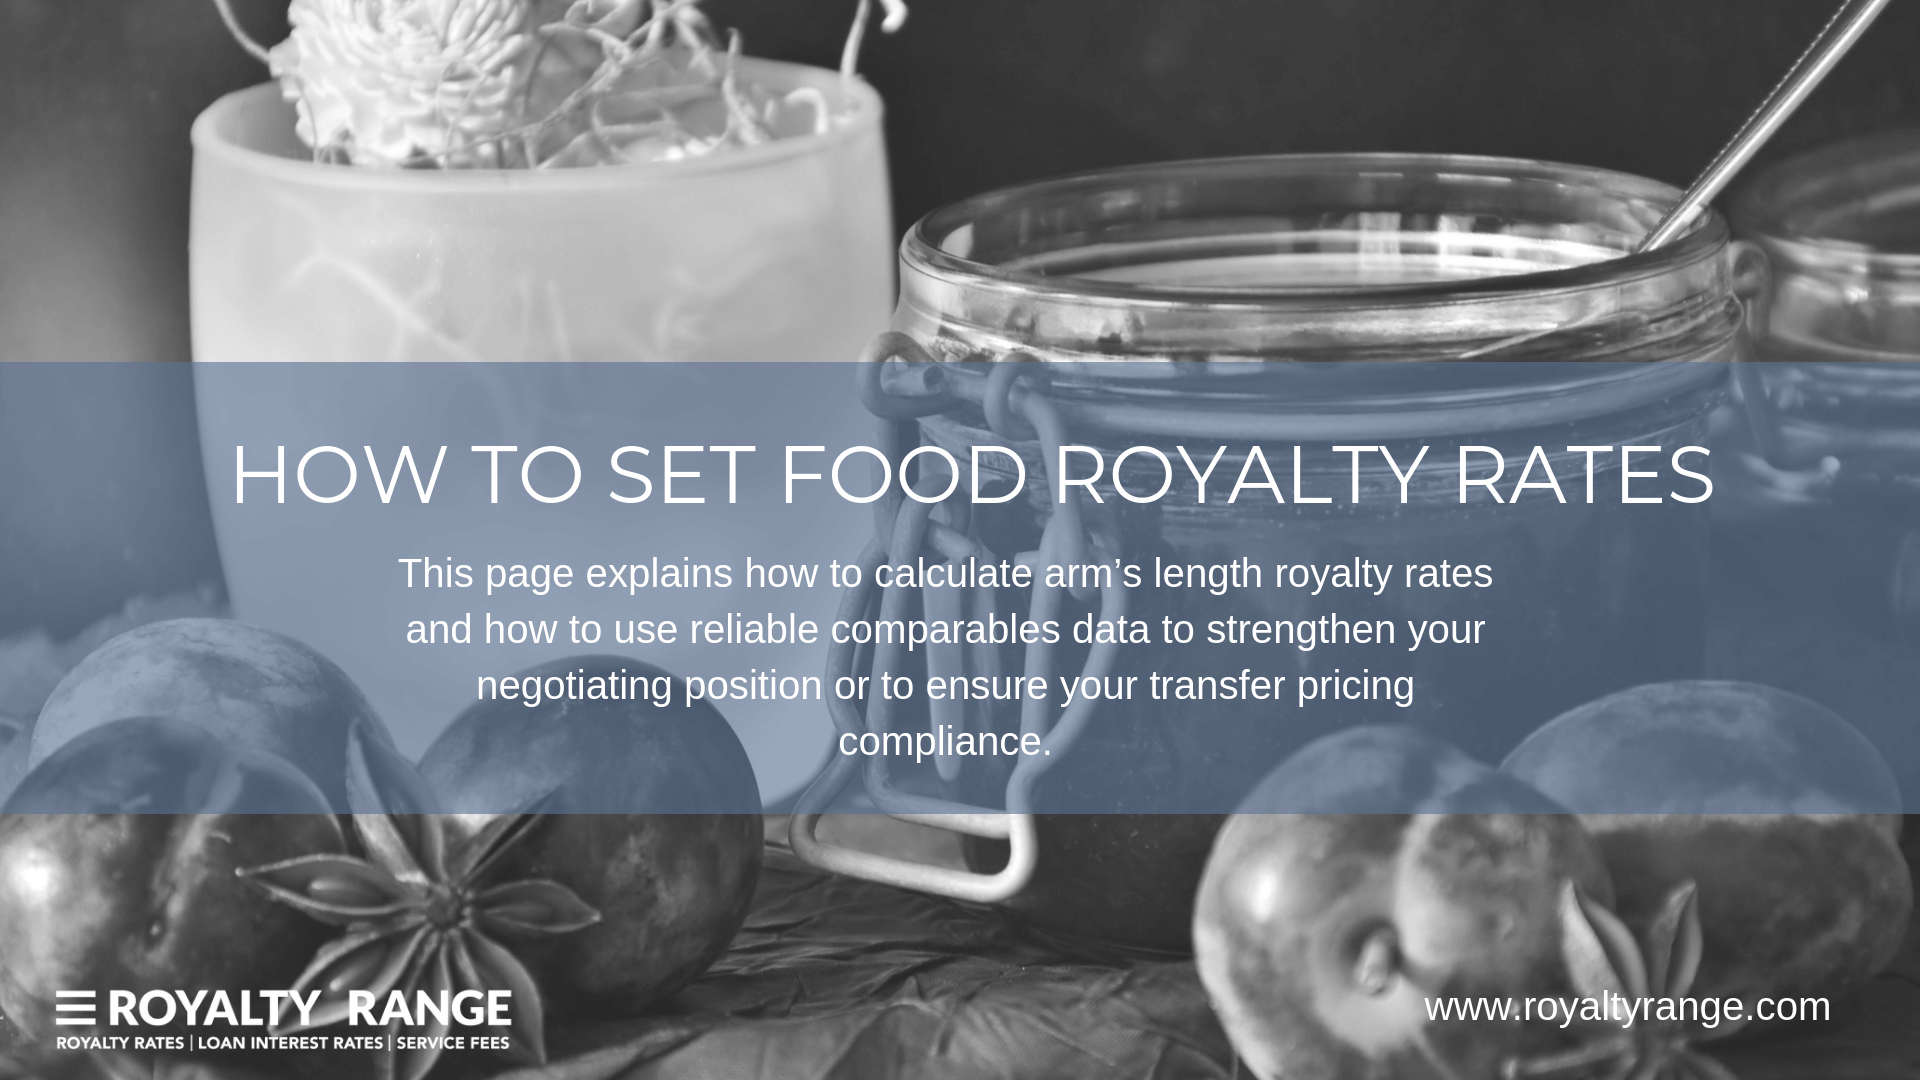 HOW TO SET FOOD ROYALTY RATES